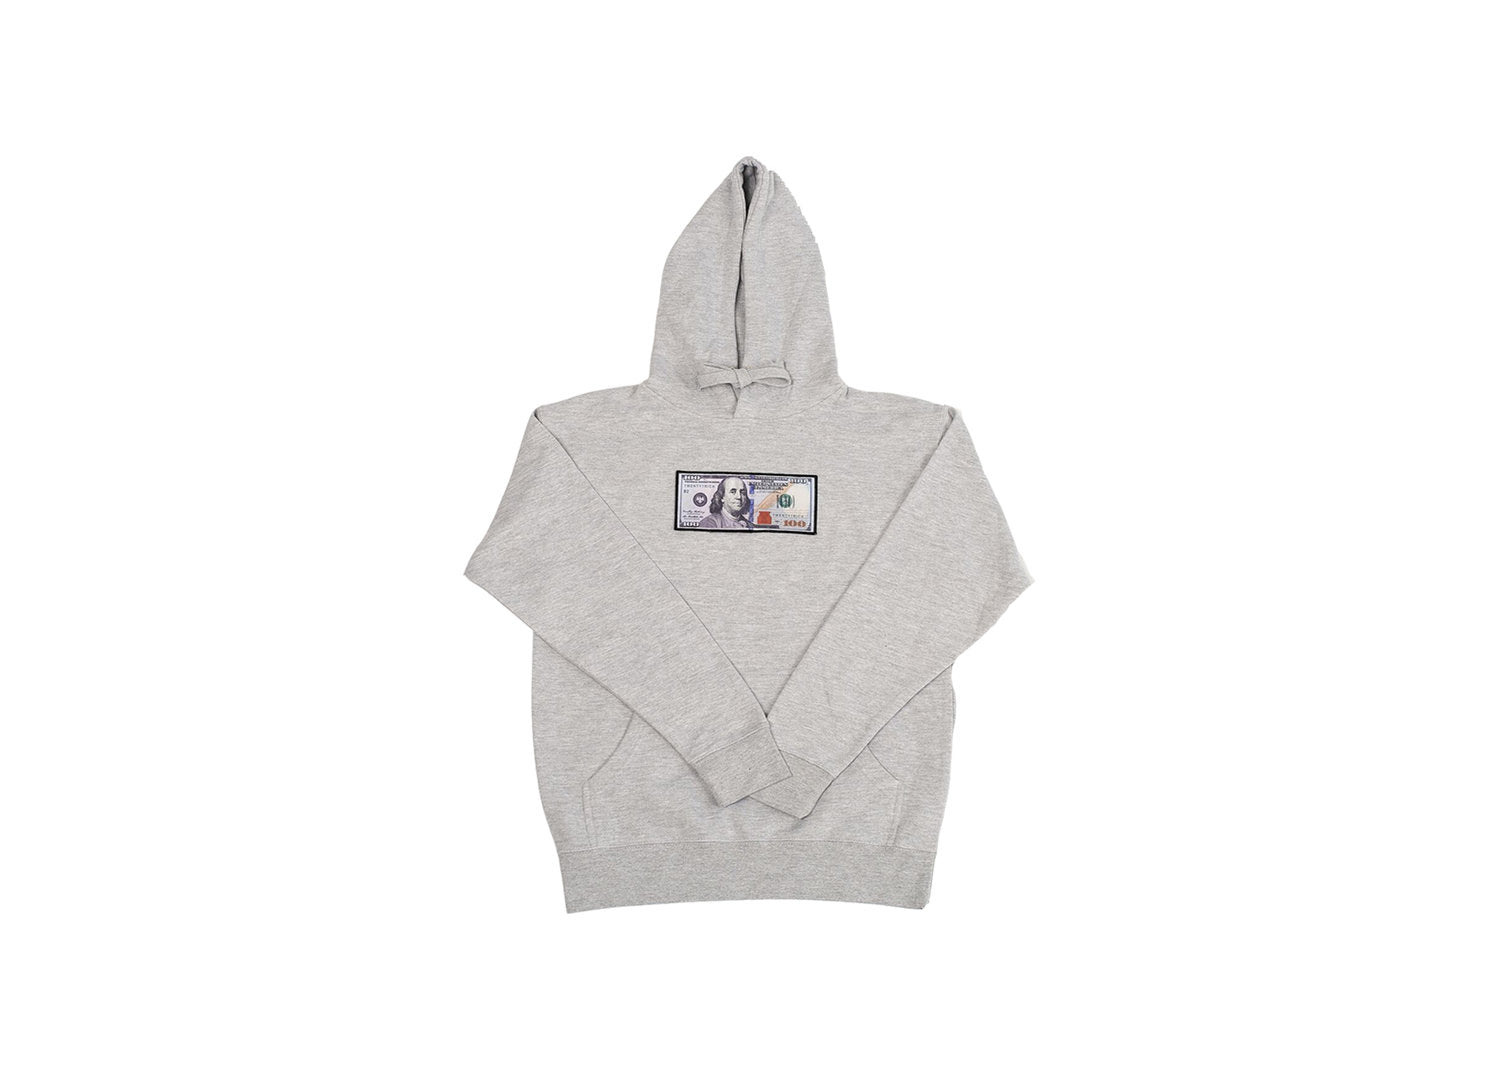 Gray Blue Hundreds Hoodie by Twenty1Rich with a $100 Blue Hundred Dollar Bill logo, Front Kangaroo Pocket, Cotton, Polyester, and Drawstring Hood